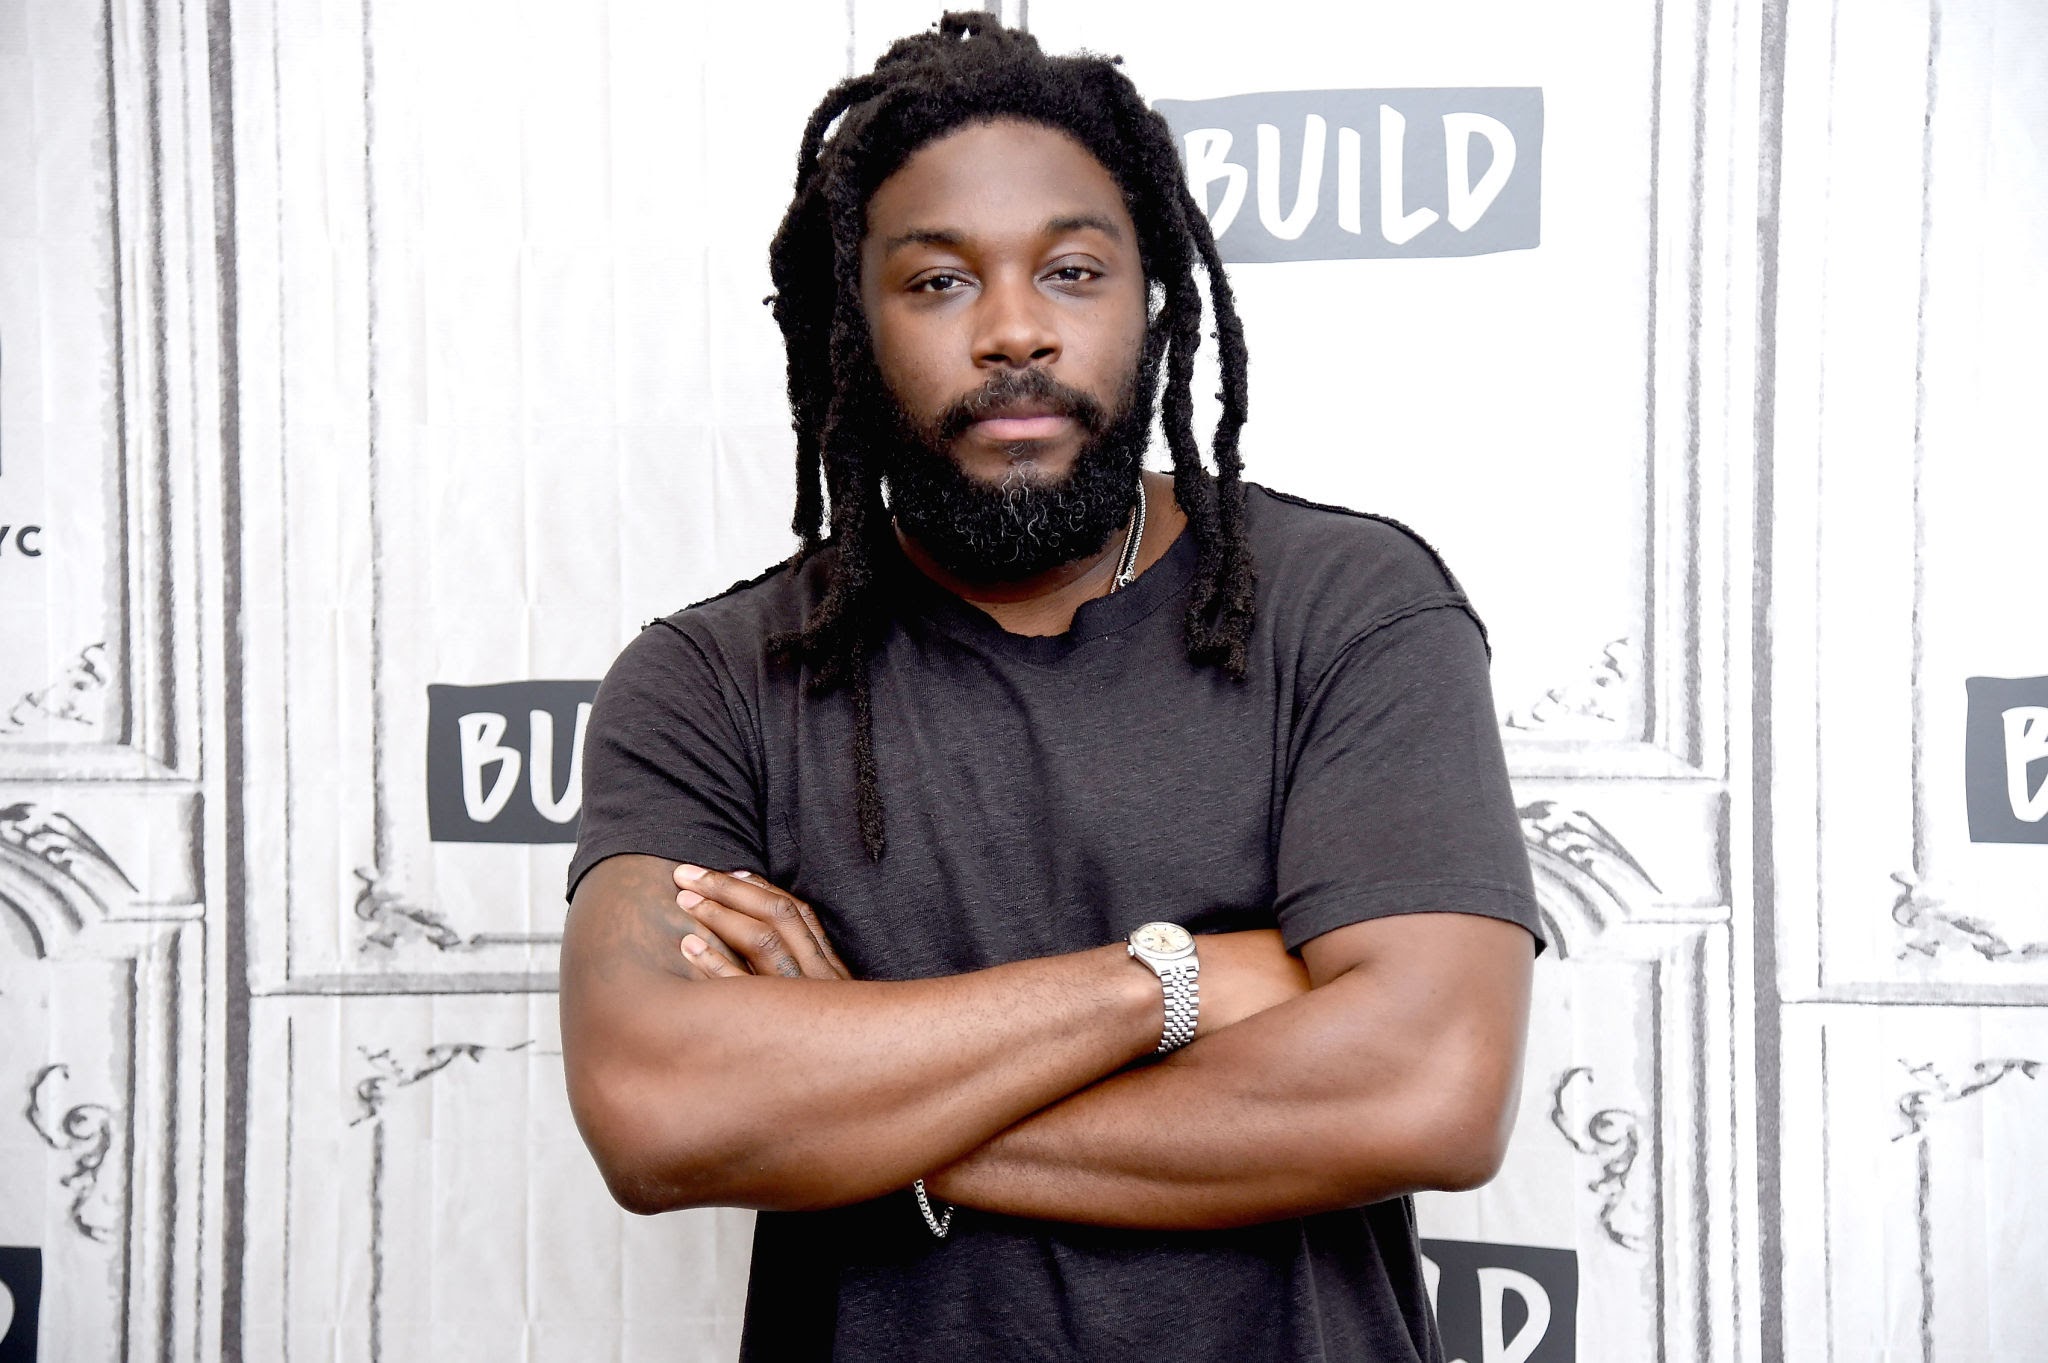 Photo shows a handsome black man with a beard and locked hair. He is wearing a short sleeve black t-shirt and has his arms crossed while looking directly at the camera. He stands againts a predominantly white background with some gray letter text as design elements. 